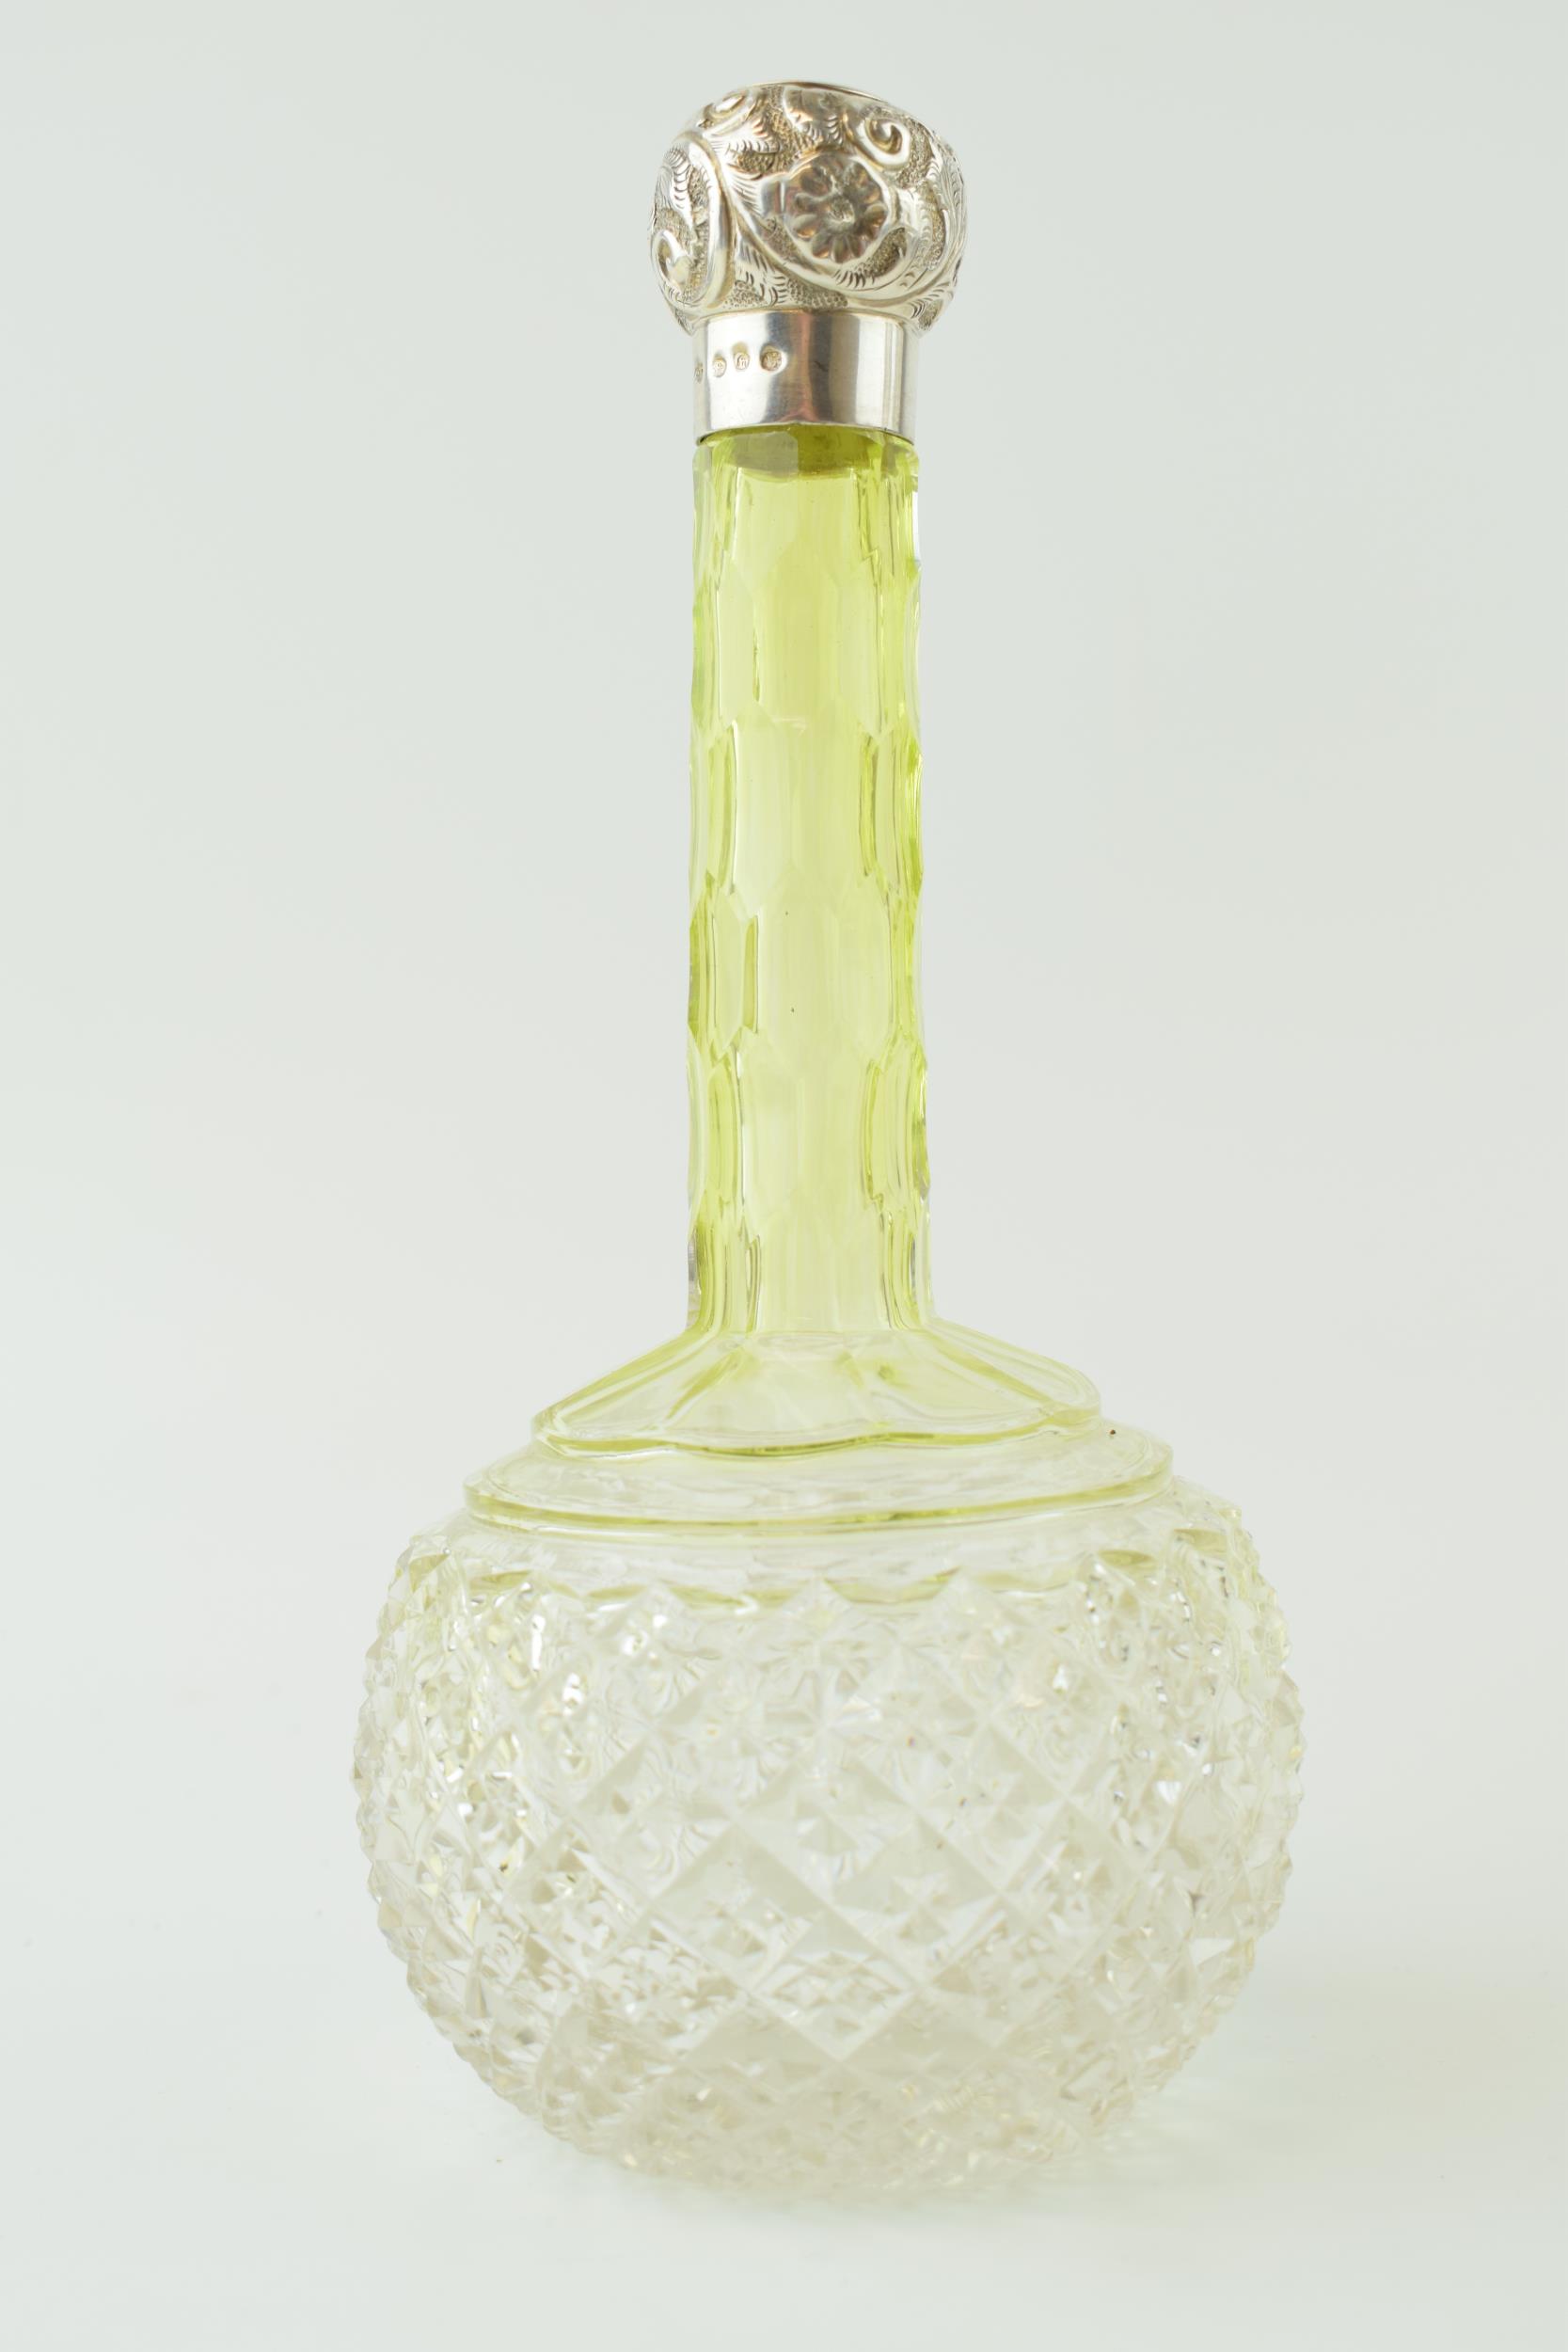 Victorian silver and glass 'pineapple' perfume bottle with green tainted glass, Birm 1896, Chas May, - Image 2 of 3